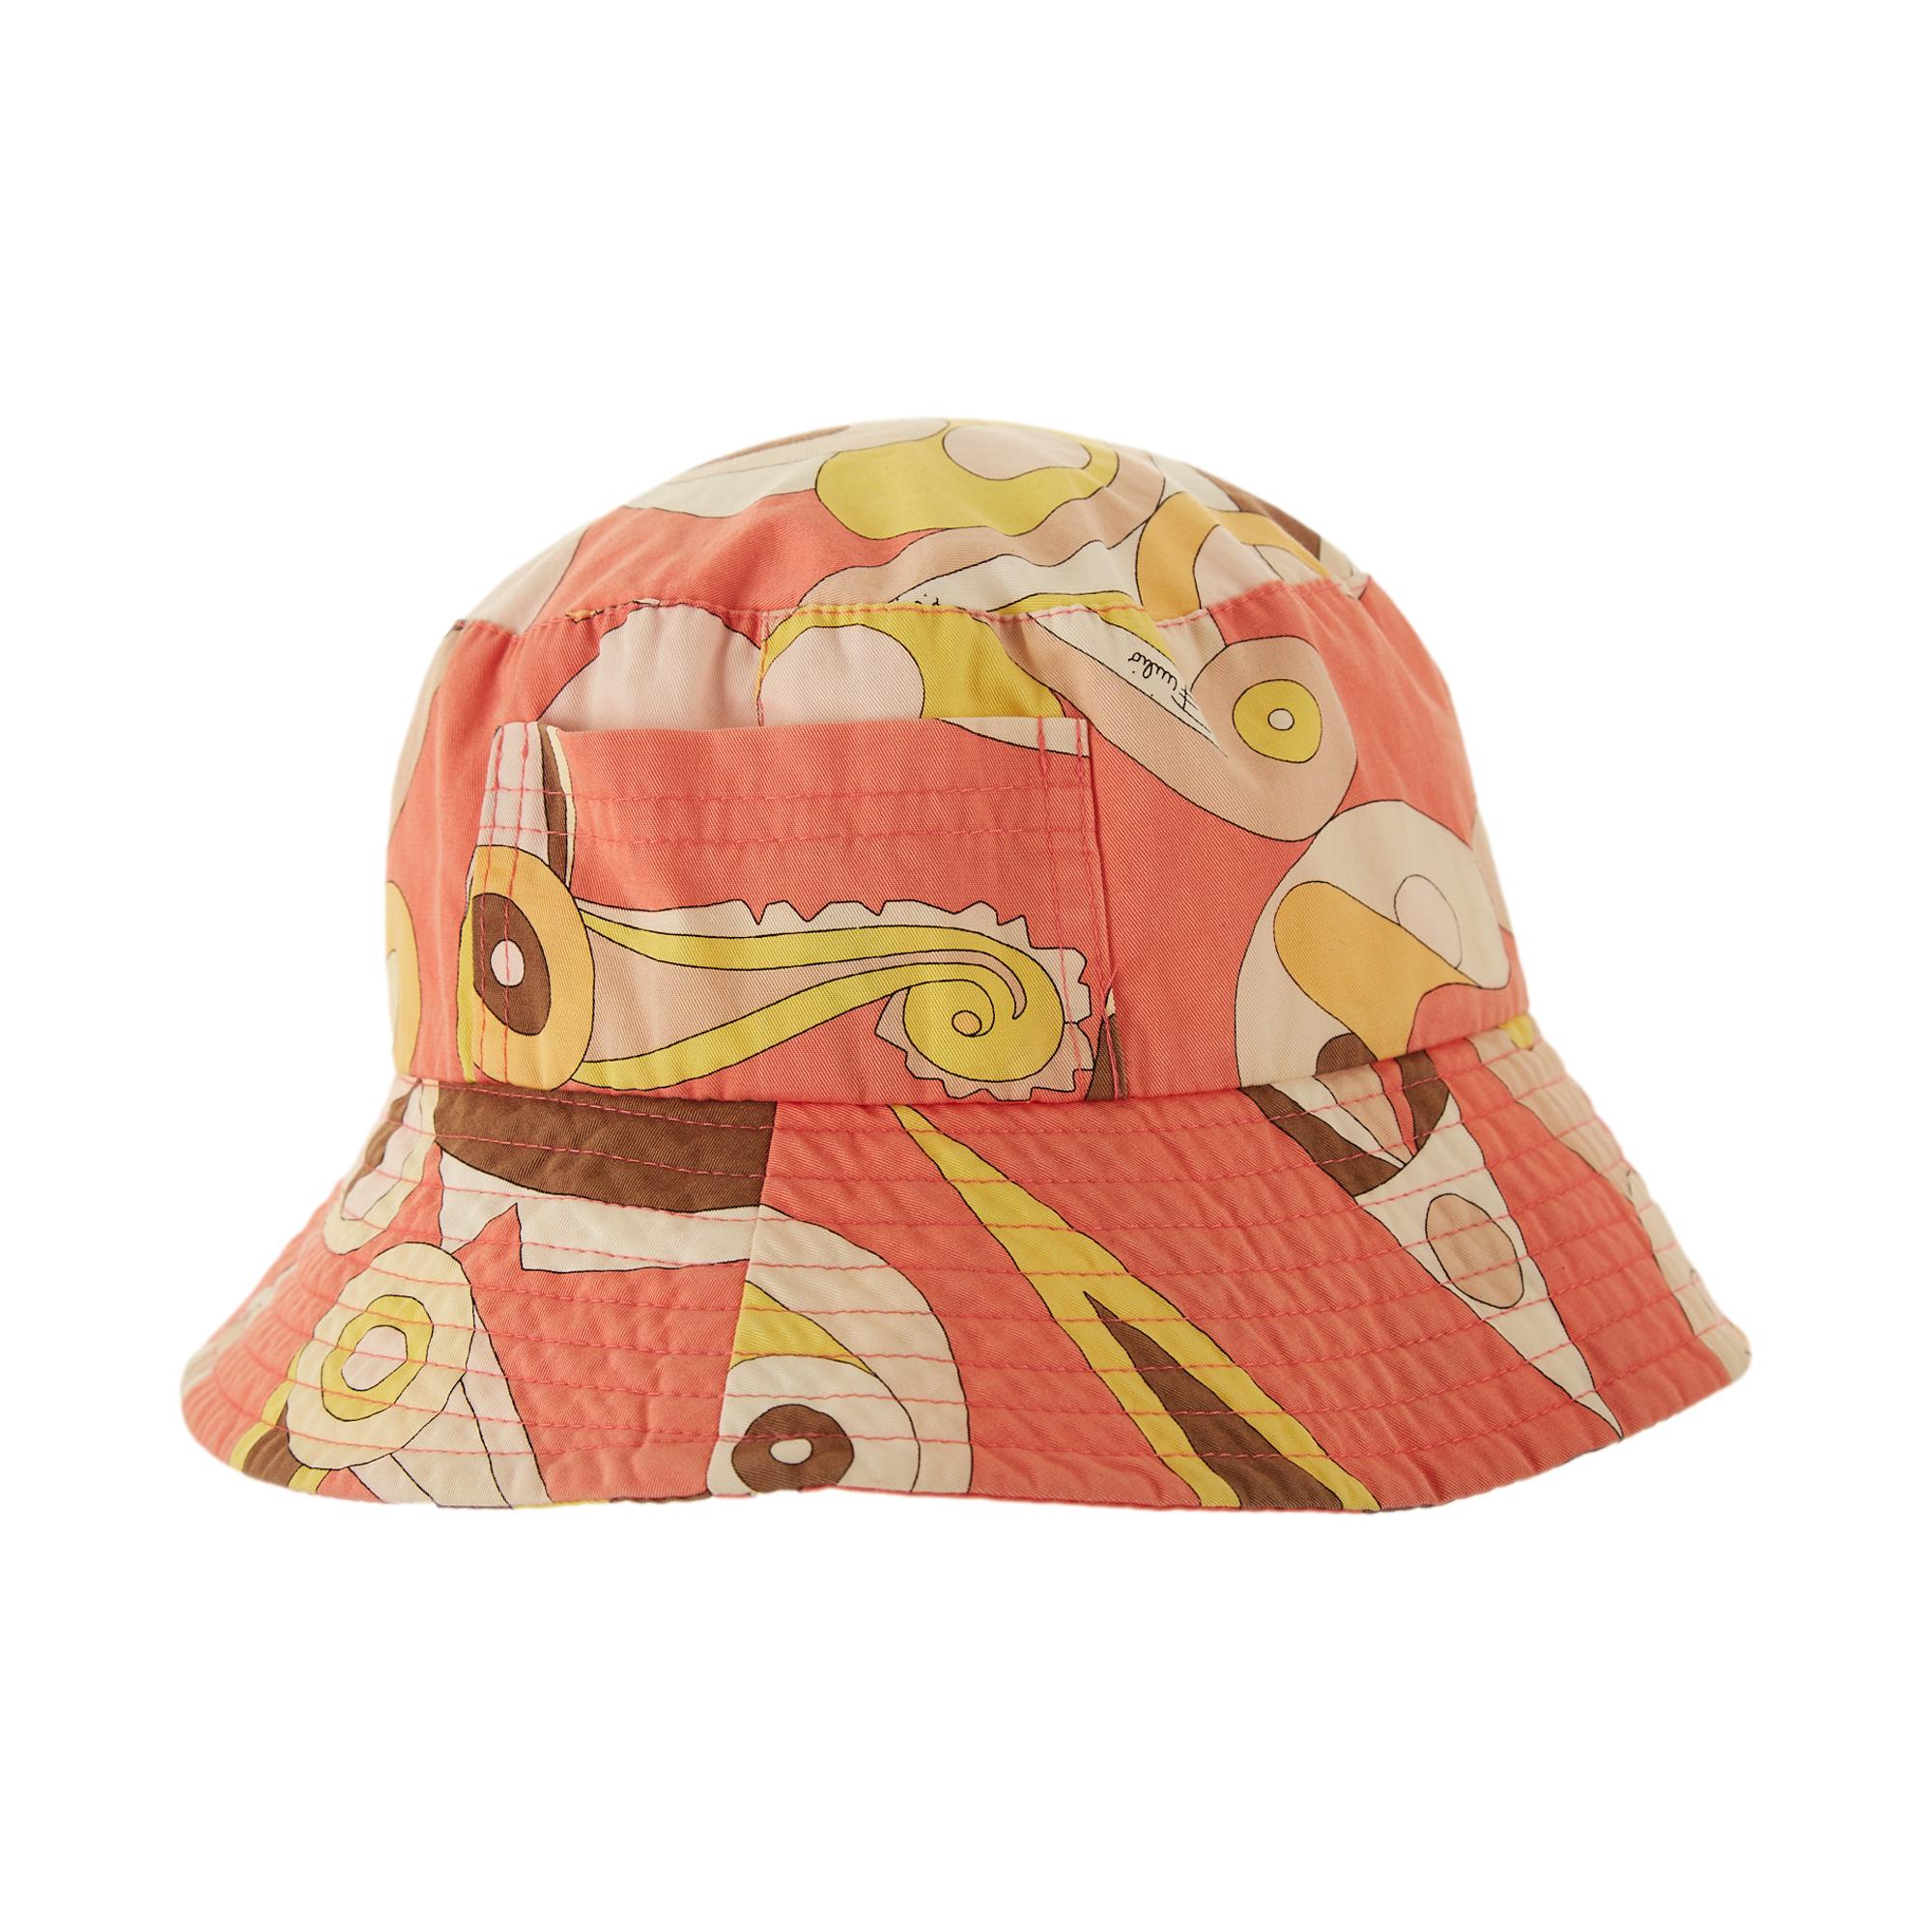 Pucci Coral Print Bucket Hat